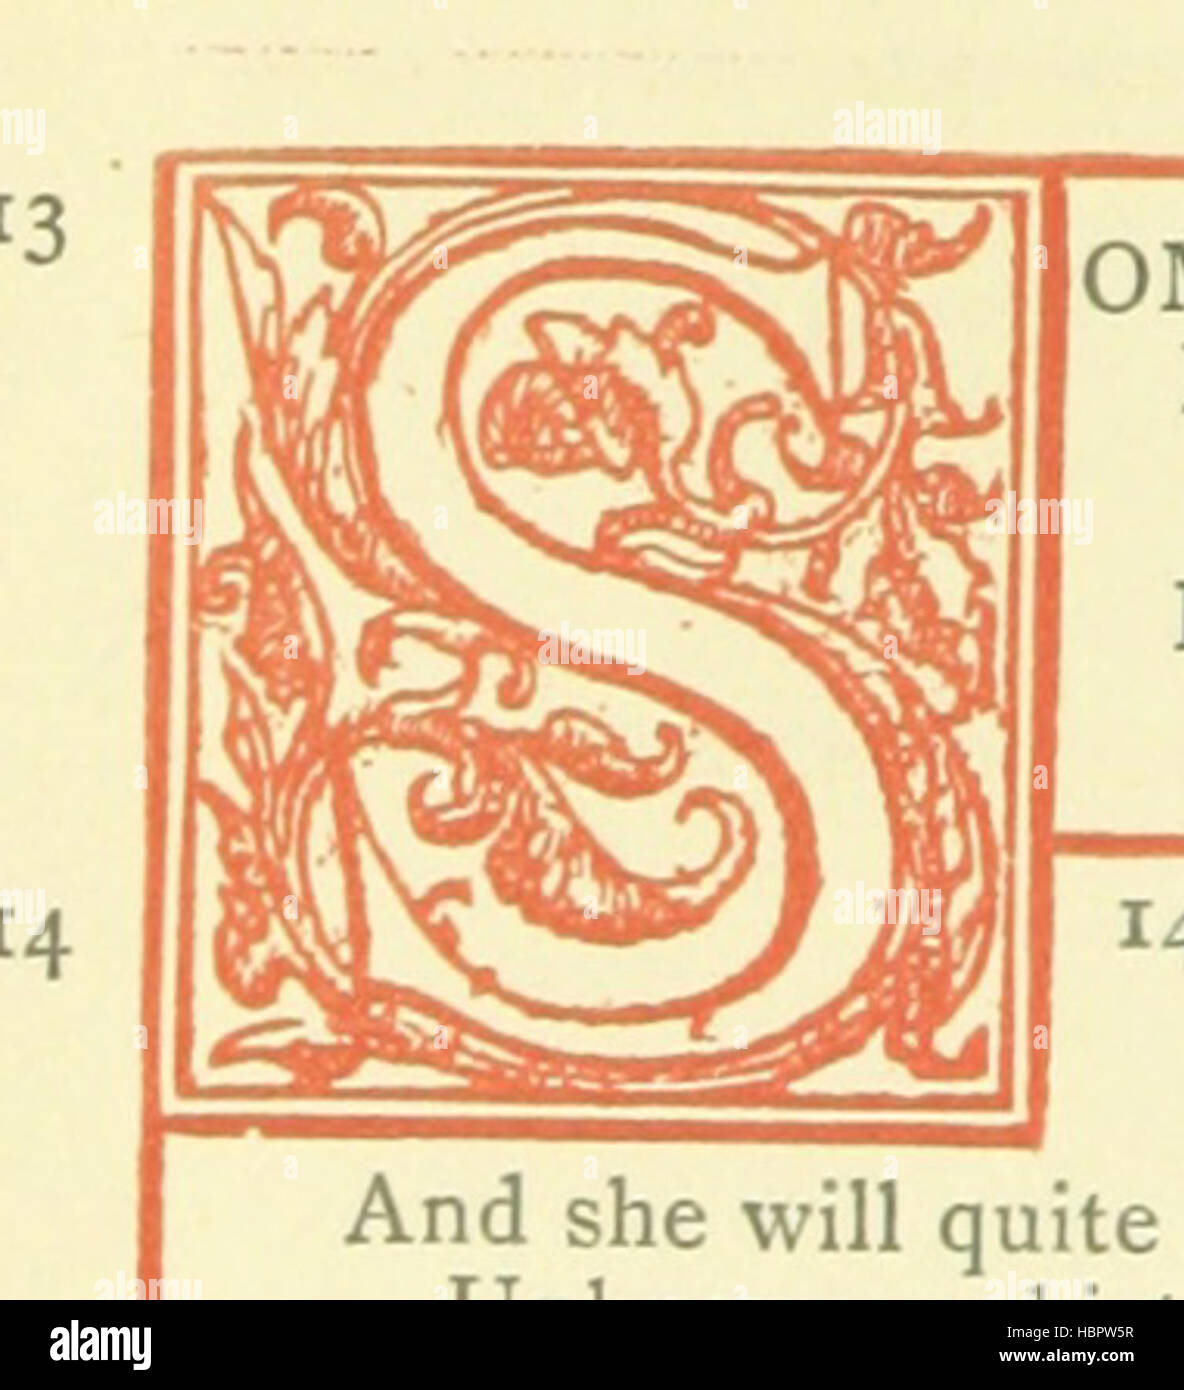 Image taken from page 24 of 'Chaucer's Beads. By Mrs. Haweis. A birthday book, diary & concordance, of Chaucers proverbs or soothsaws' Image taken from page 24 of 'Chaucer's Beads By Mrs Stock Photo